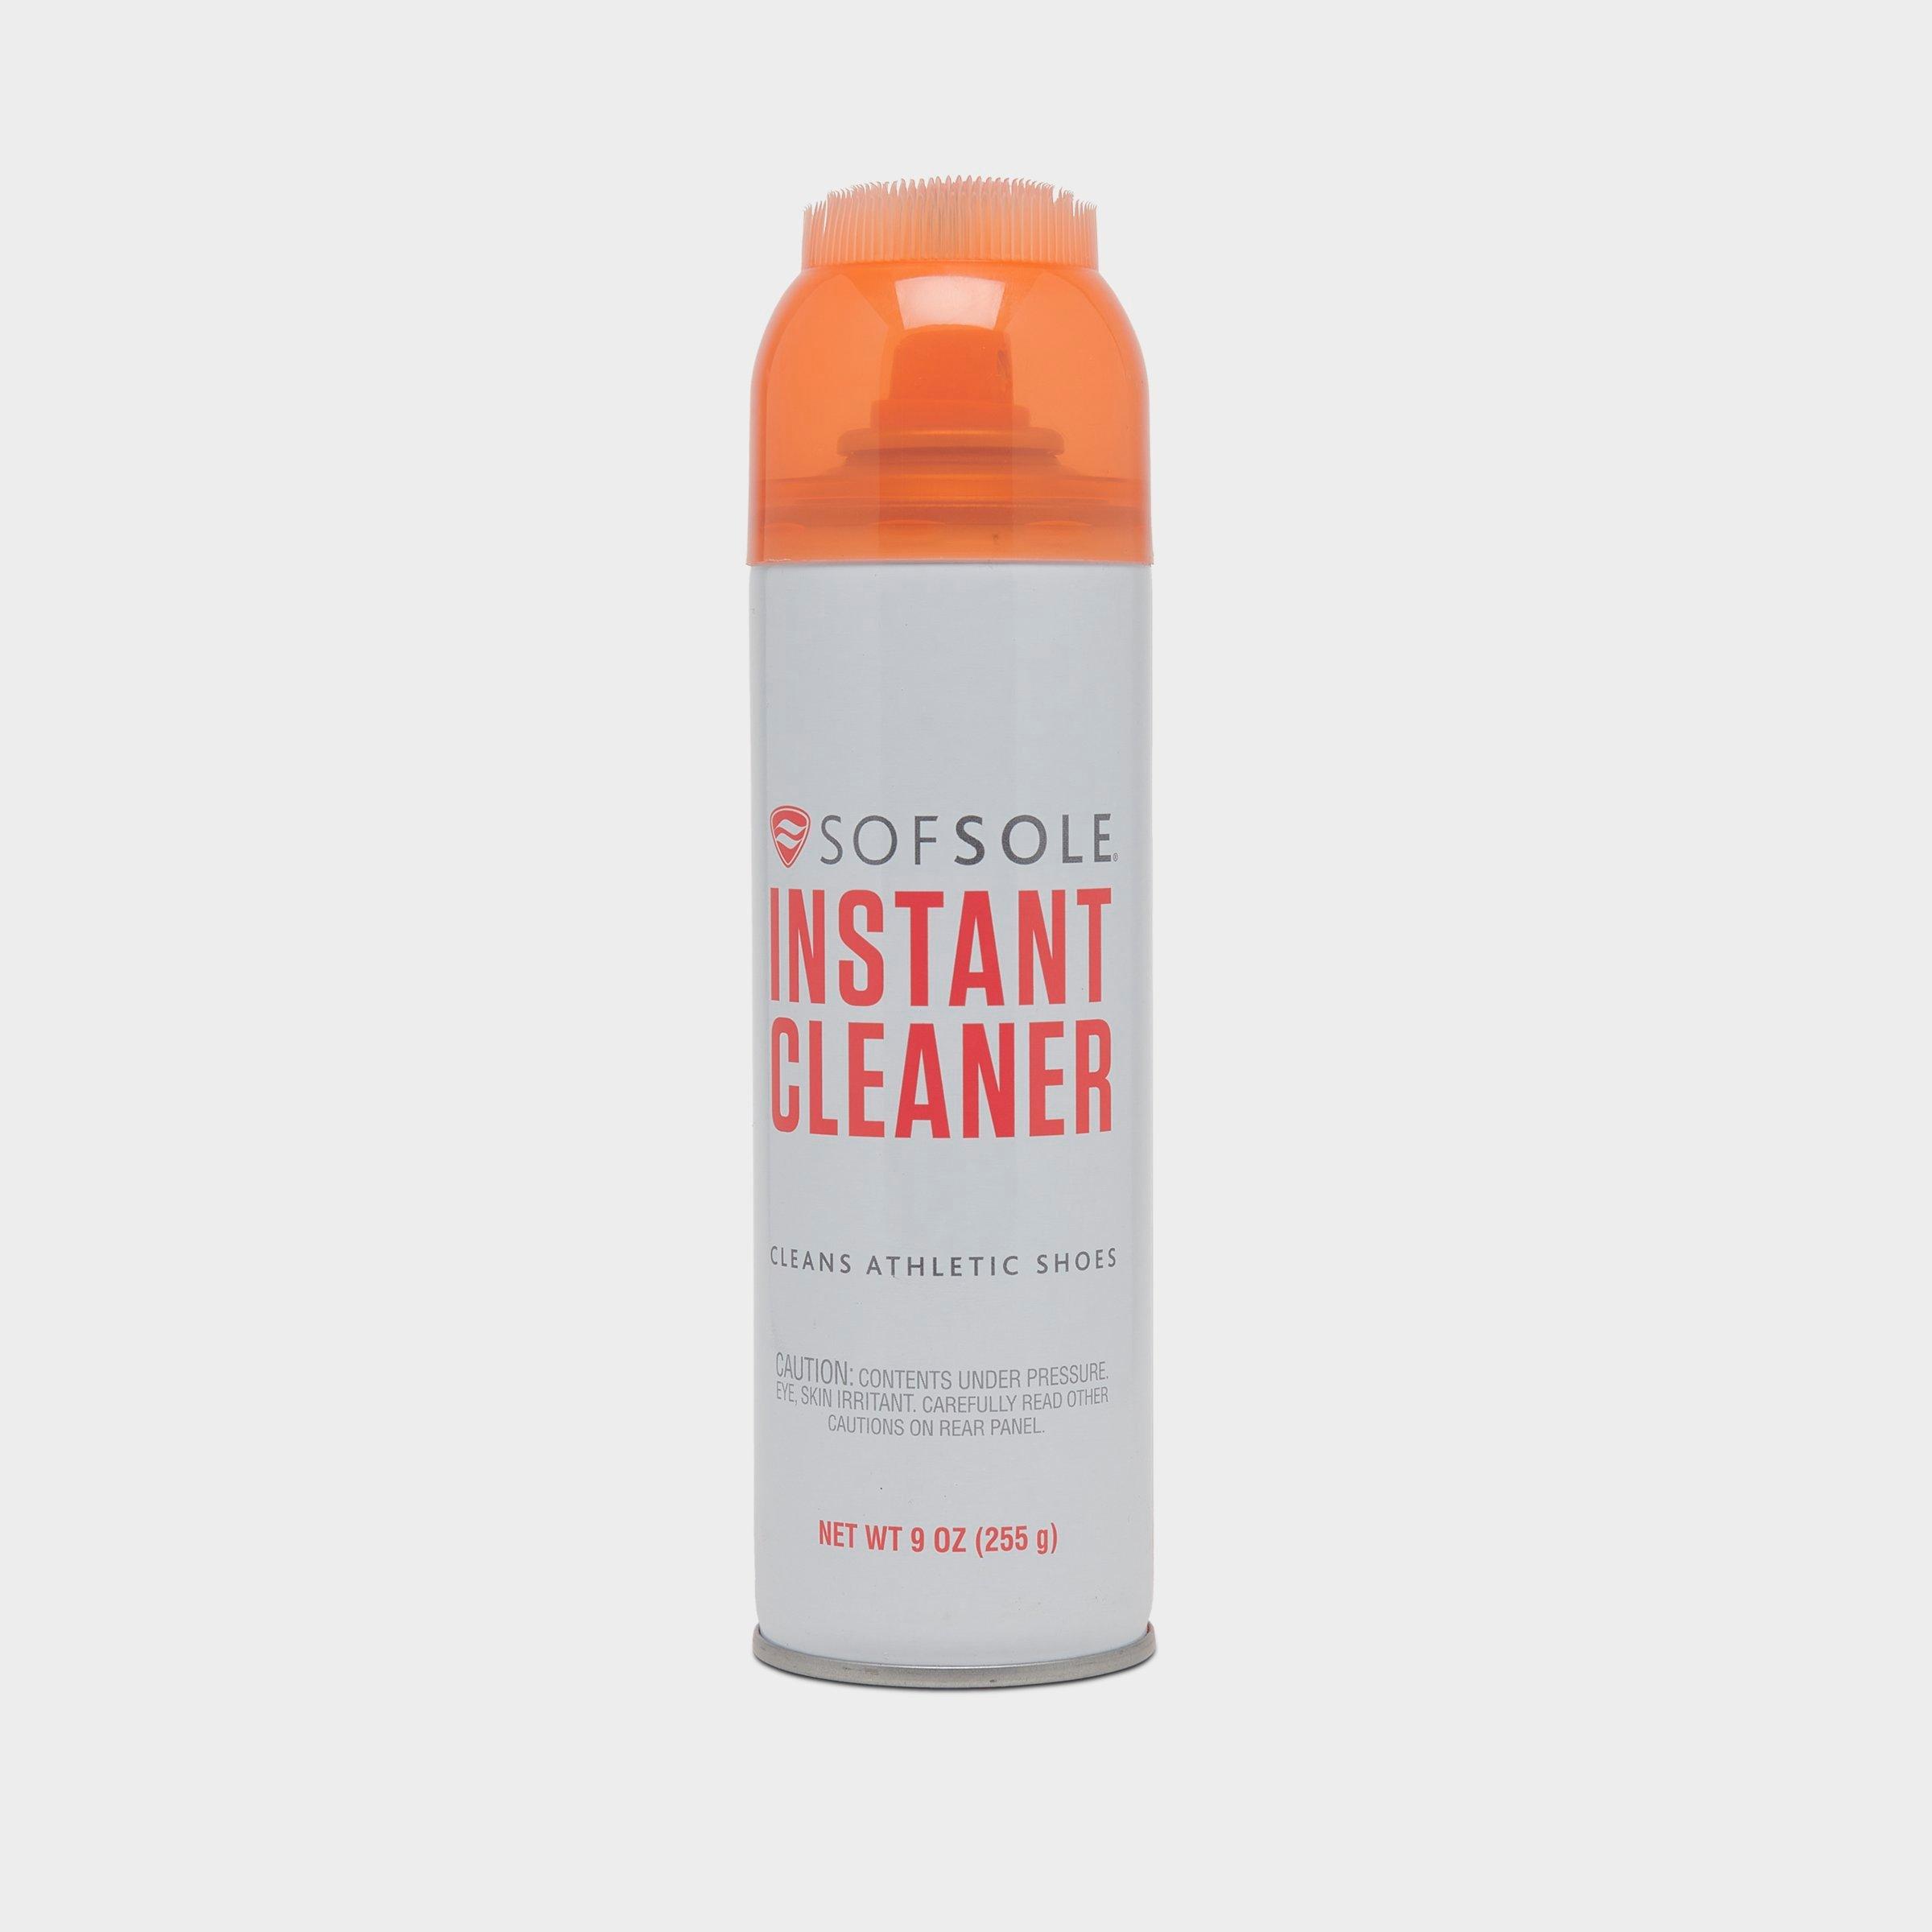 Sof Sole Instant Cleaner| JD Sports